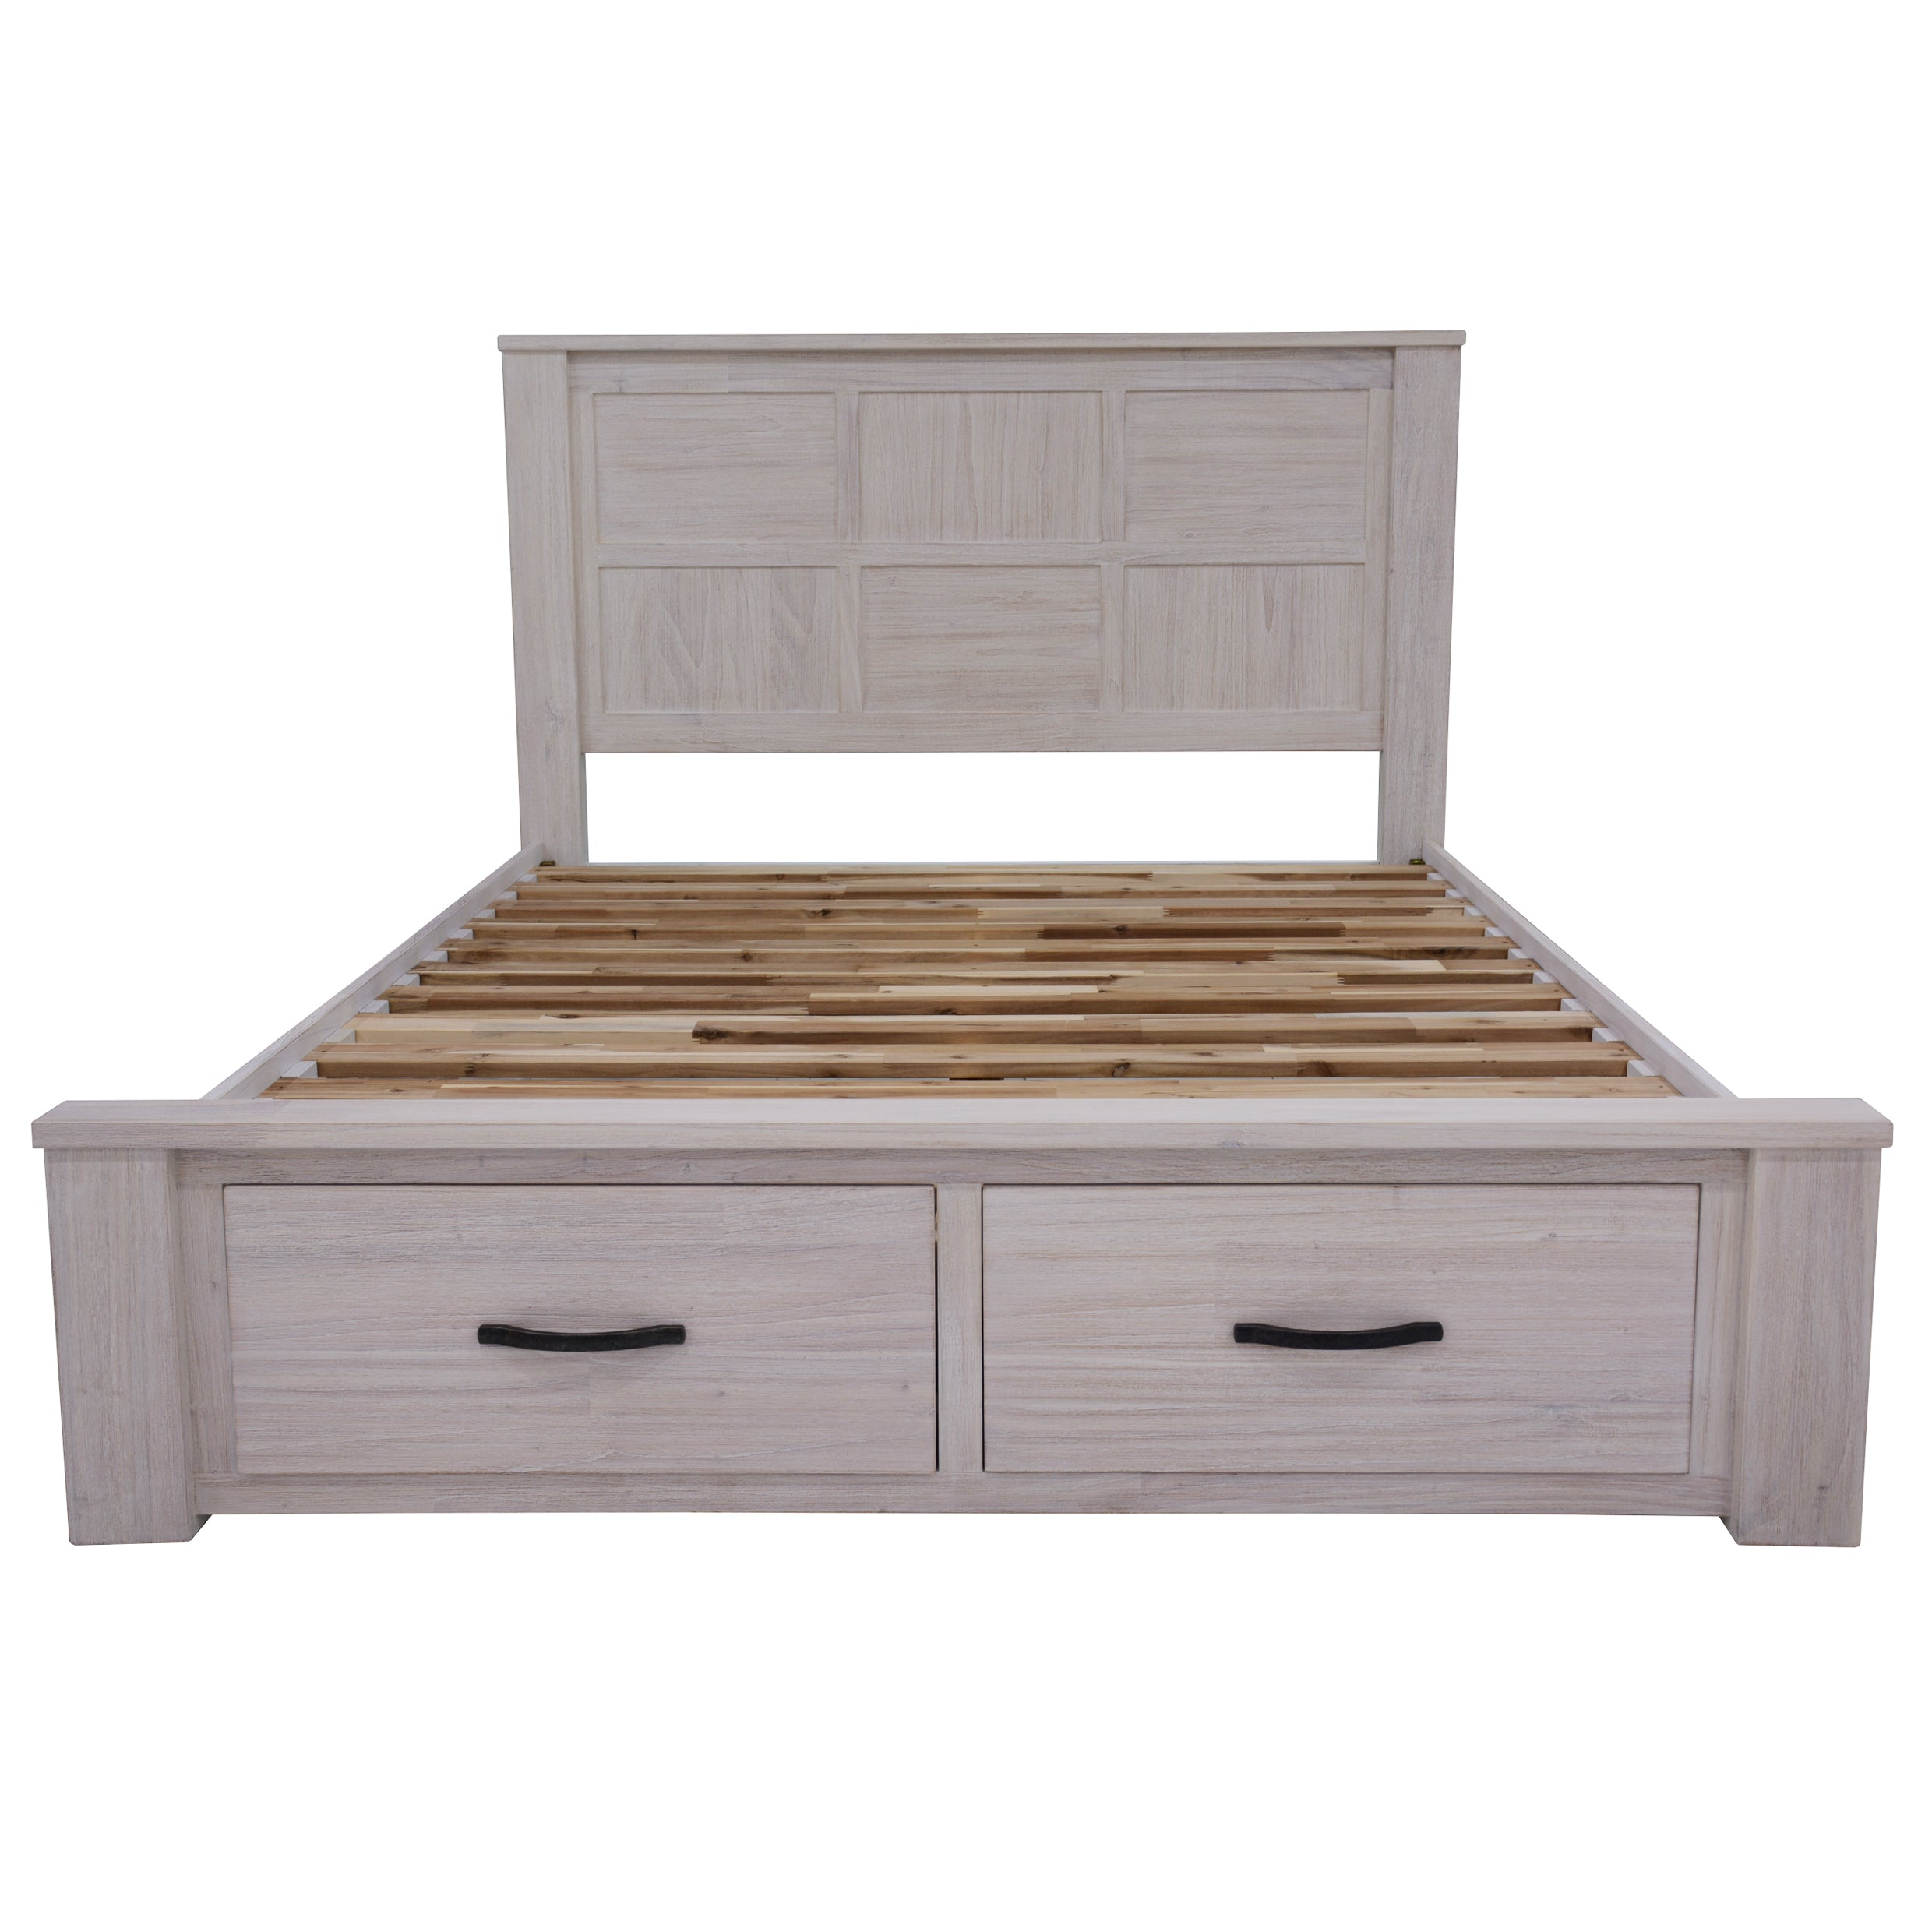 Queen Size Bed Frame With Storage Drawers - White